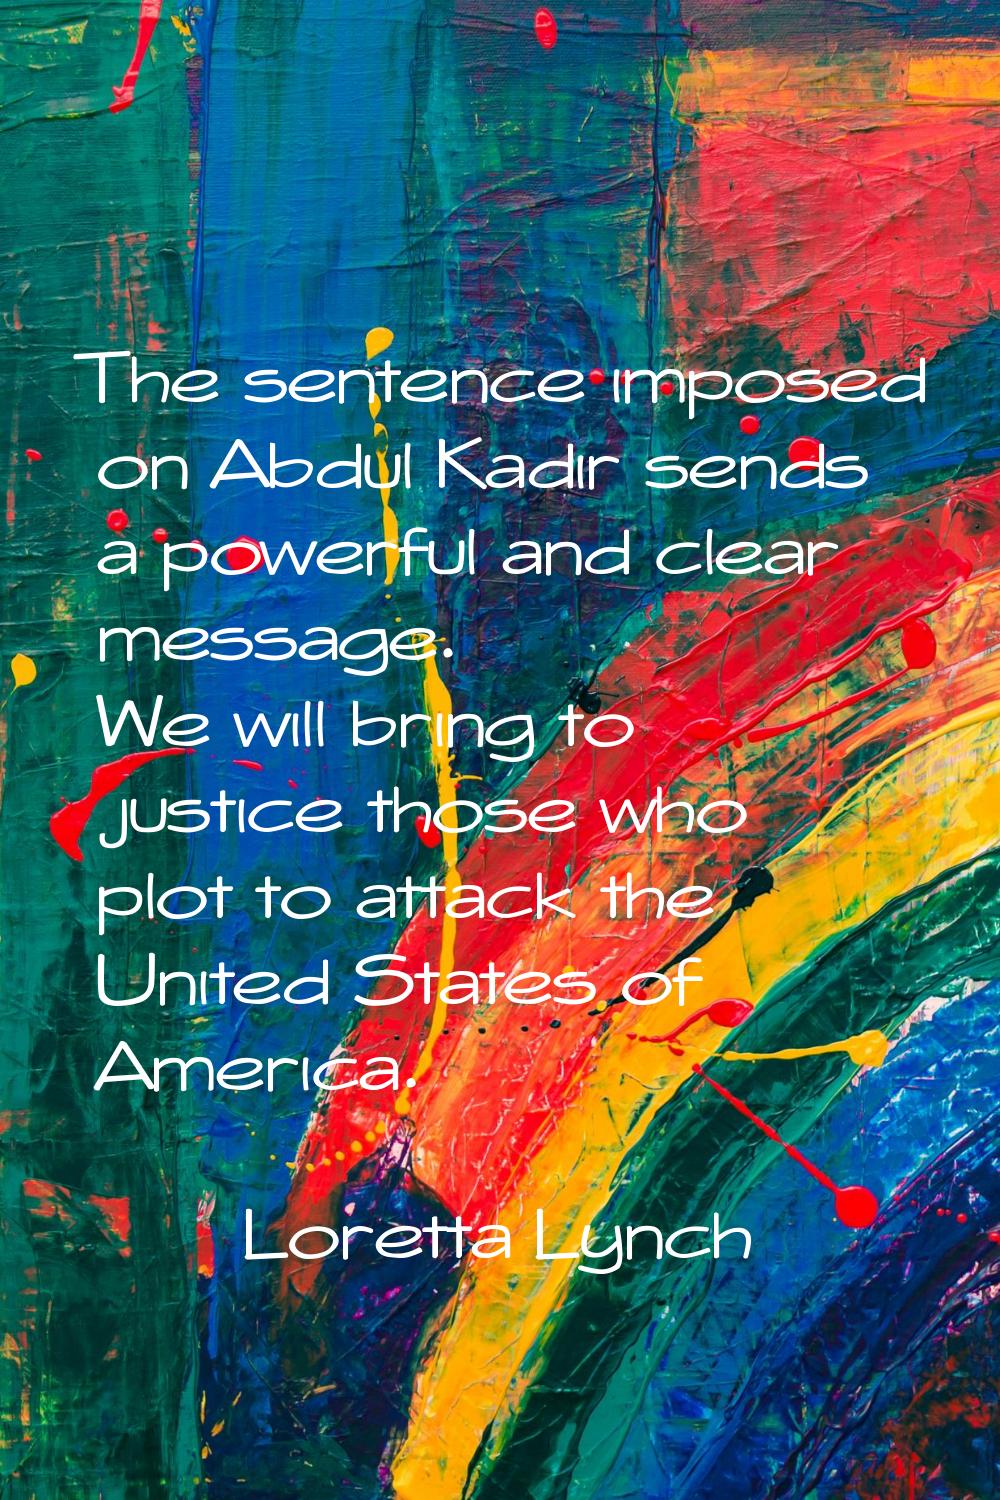 The sentence imposed on Abdul Kadir sends a powerful and clear message. We will bring to justice th